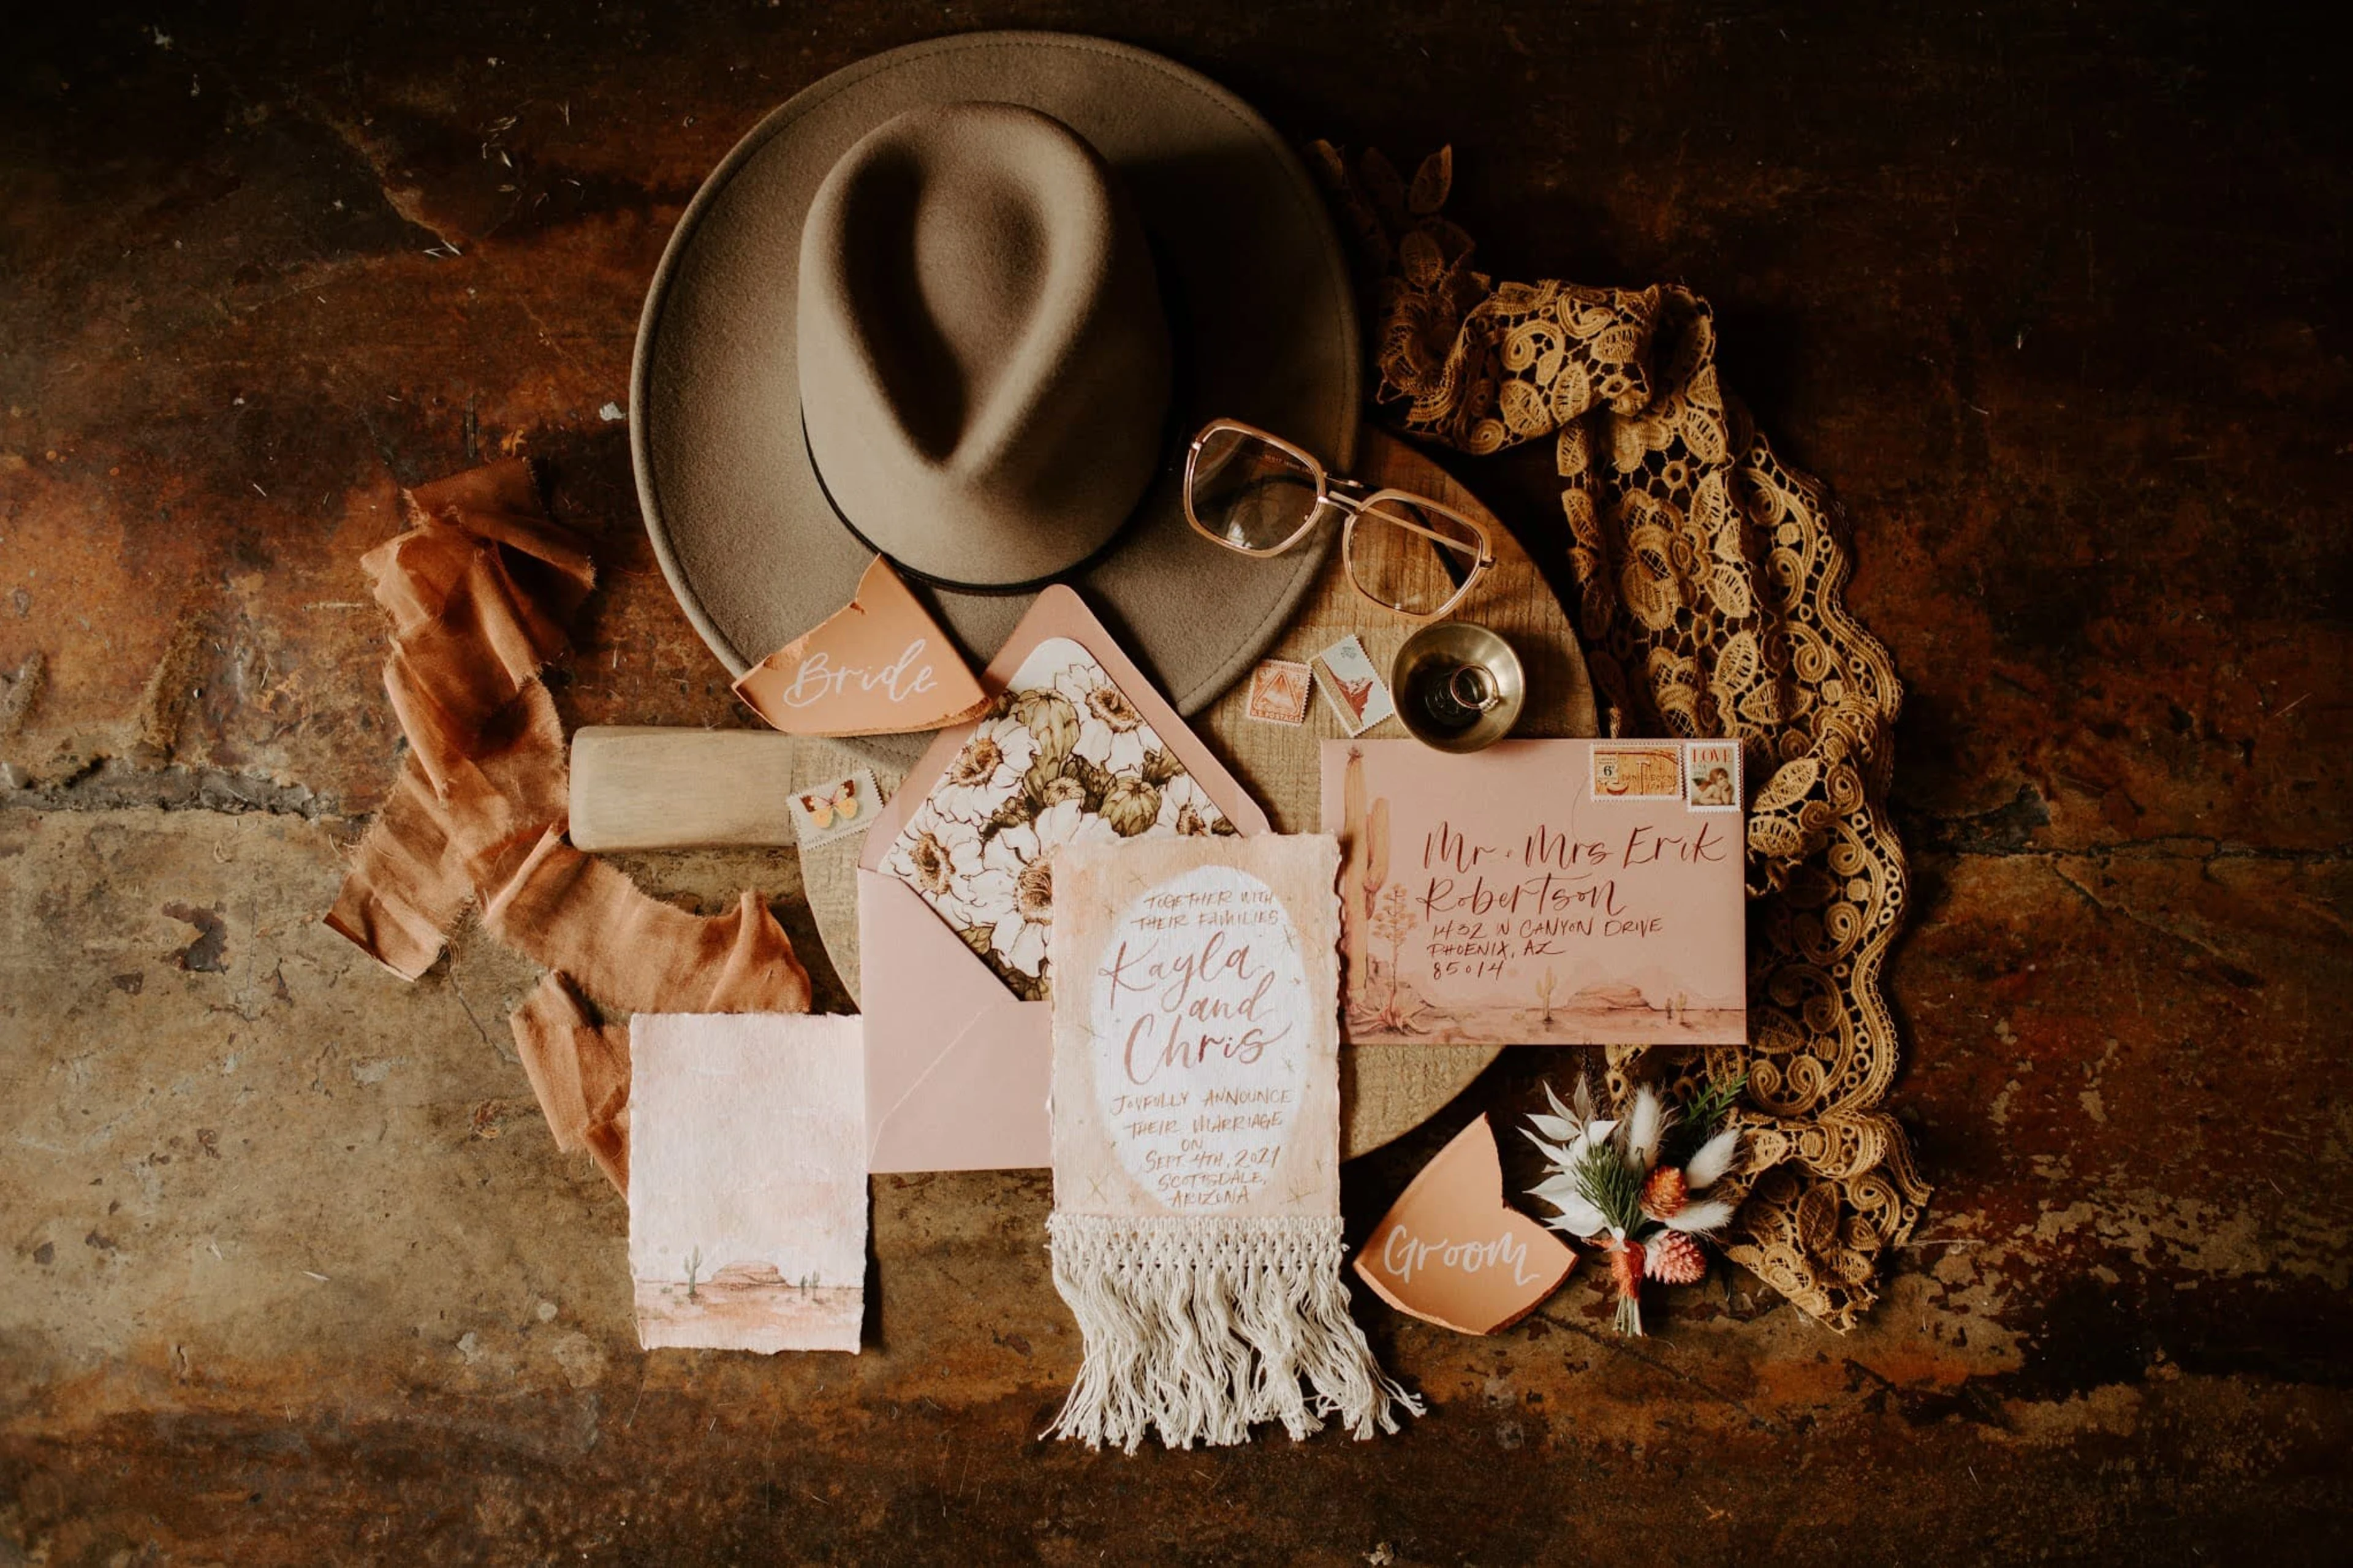 A wedding invitation surrounded by a hat, scarf, and flowers.